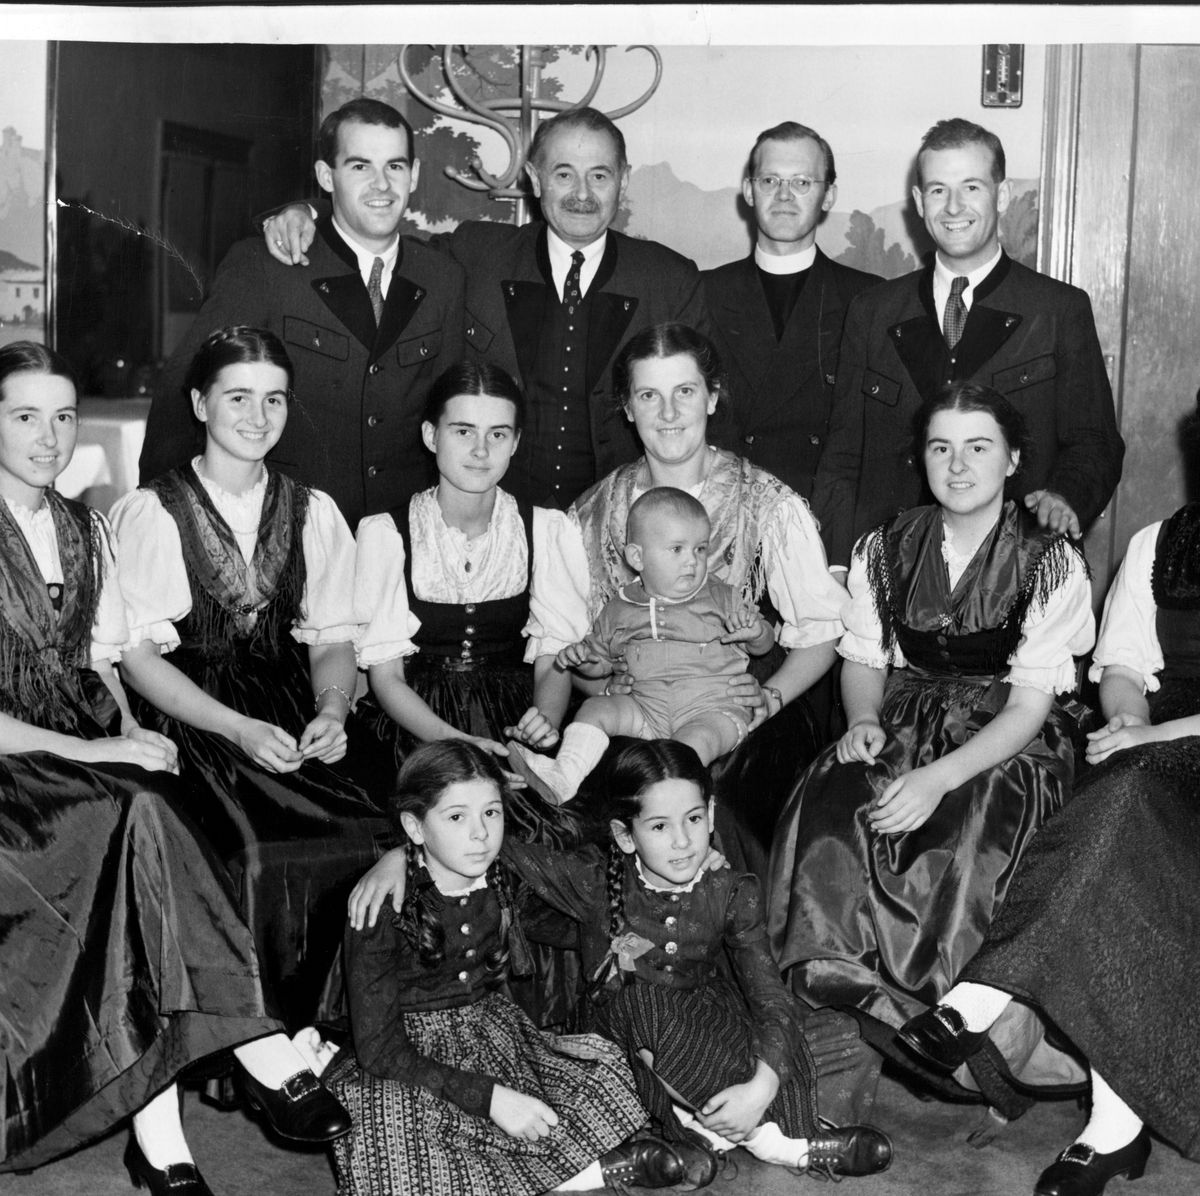 The Real von Trapp Family That Inspired 'The Sound of Music